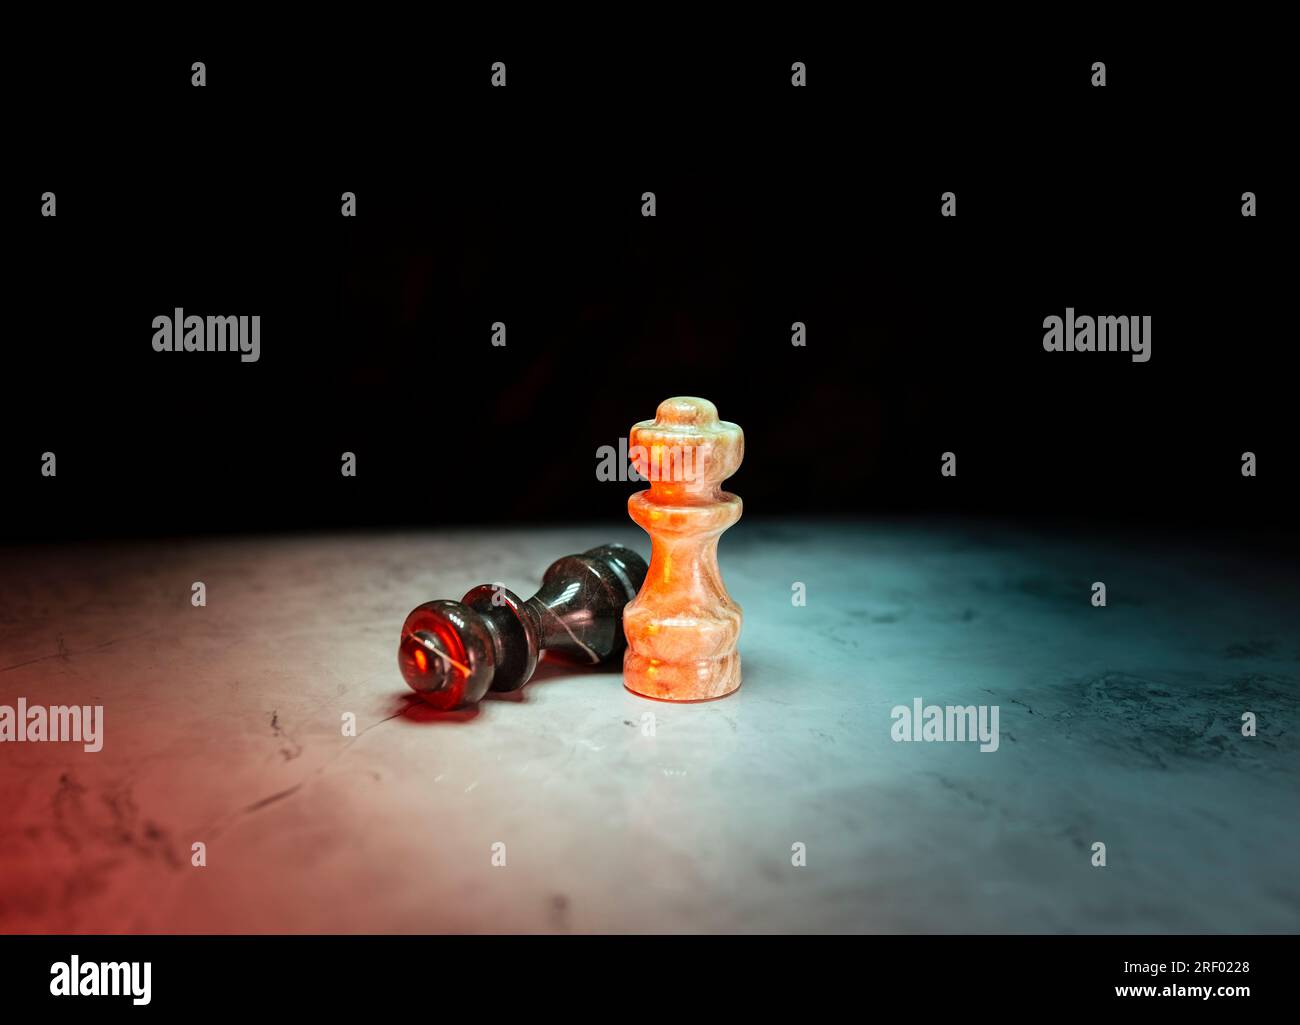 high quality close-up chess piece draw. Creative and colorful chess photography. Black and white shamrock shoot. Concepts of good and evil. Stock Photo